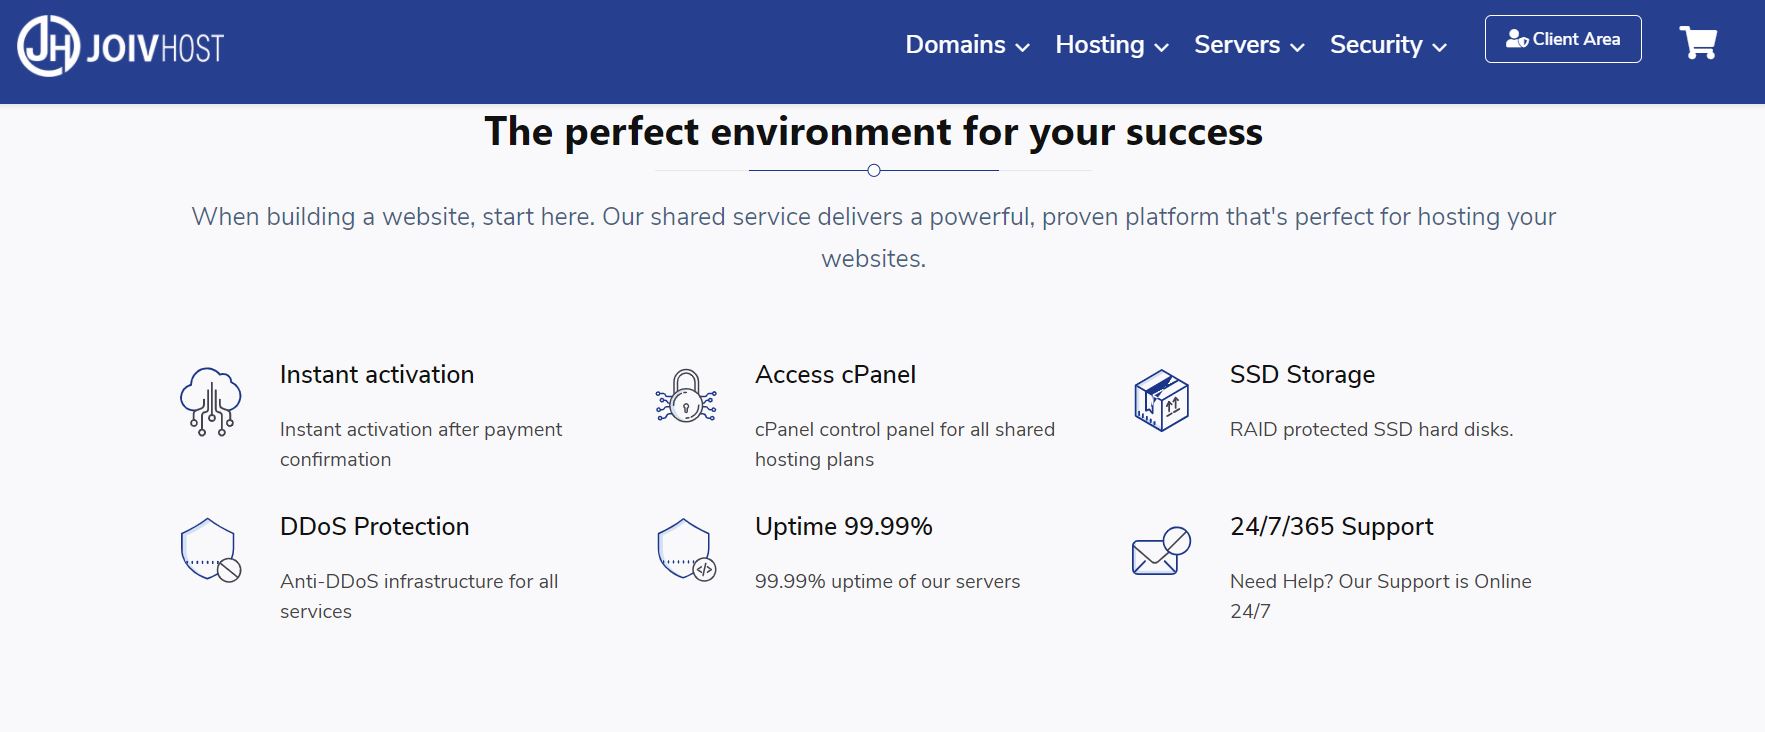 joivhost features